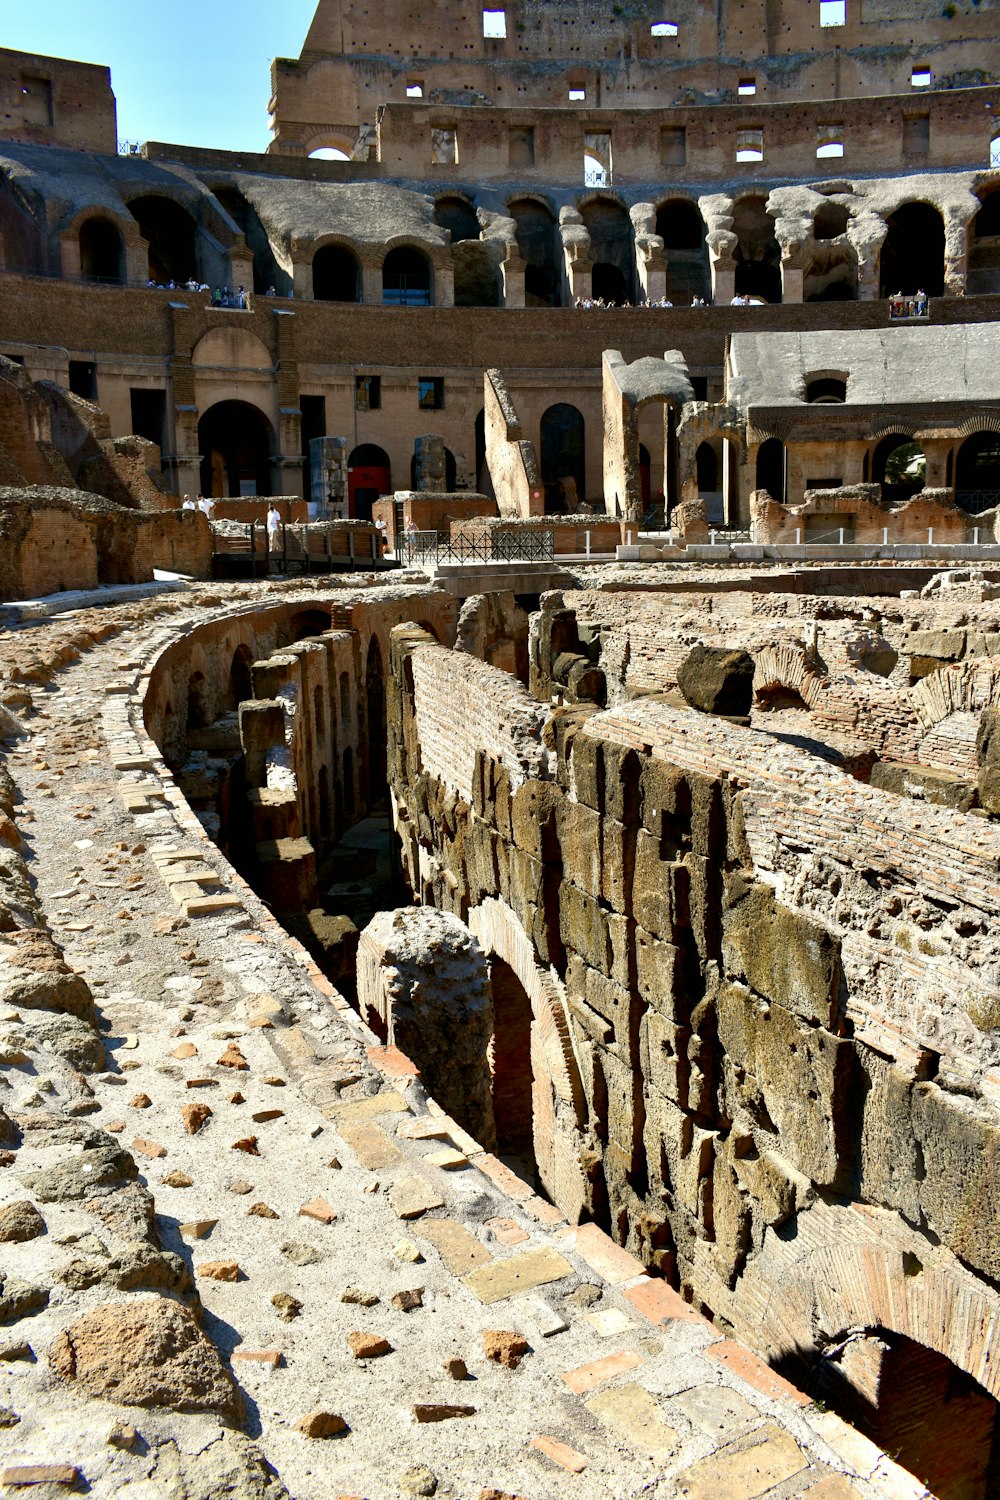 the interior of an ancient roman city